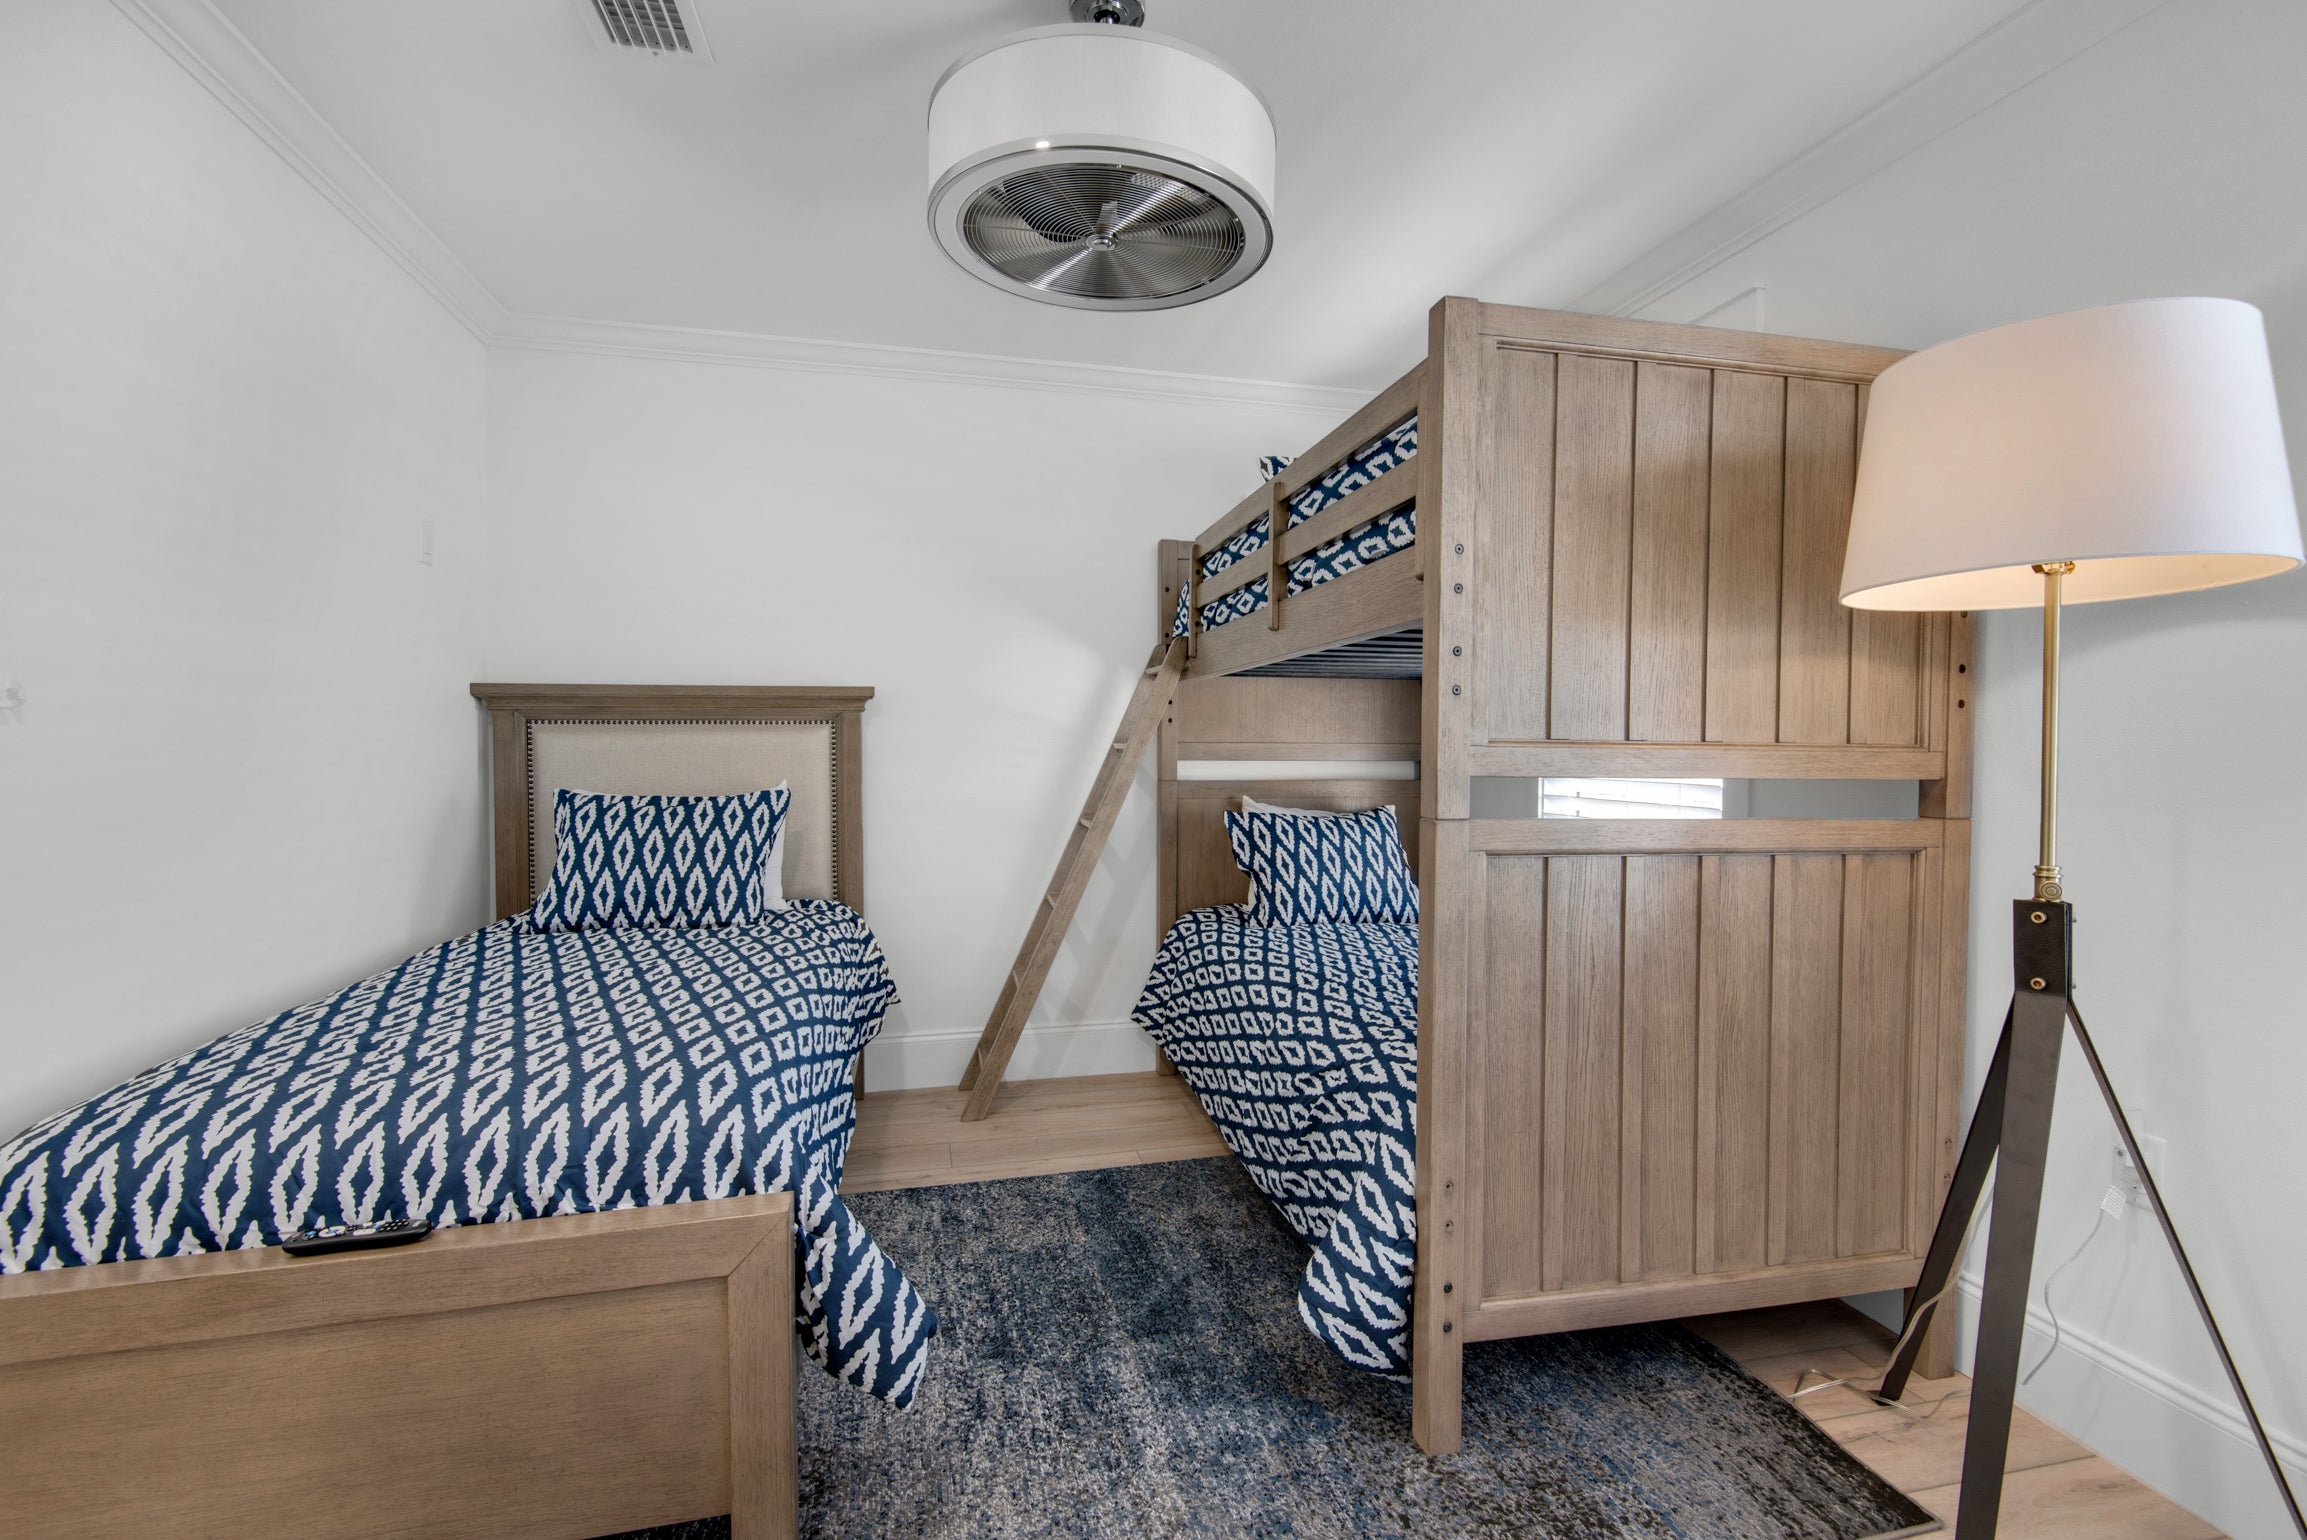 Bunk room with 3 beds